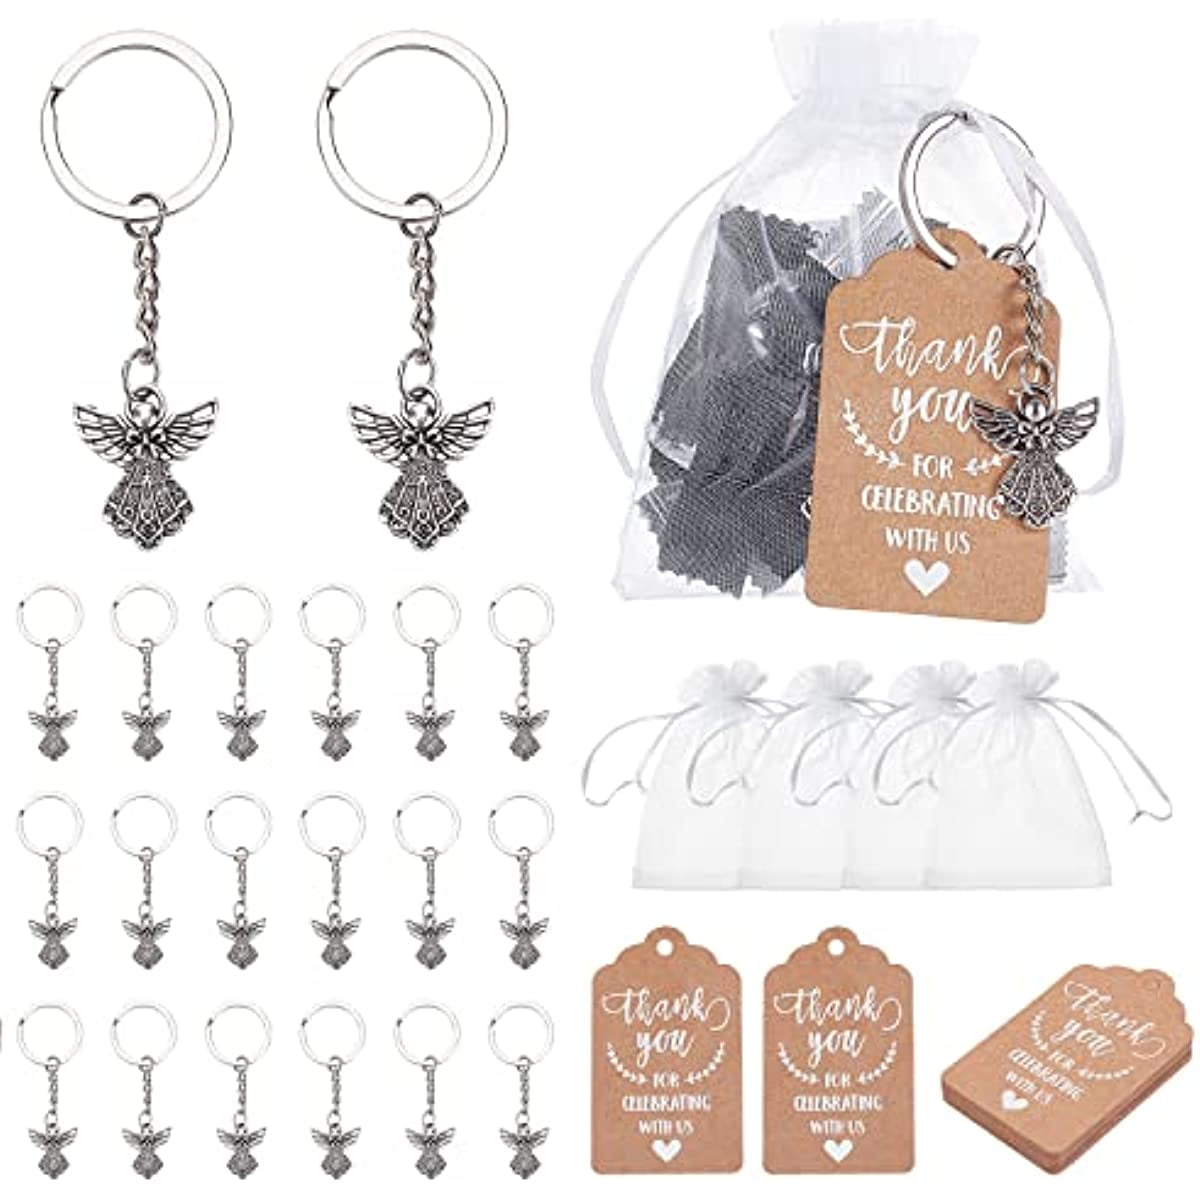 Shein 10pcs Gold Keychain/Ring Including Pouch, Card, String Suitable for Baby Showers, Weddings or Bridal Showers, Party Favors, Family Party Gifts